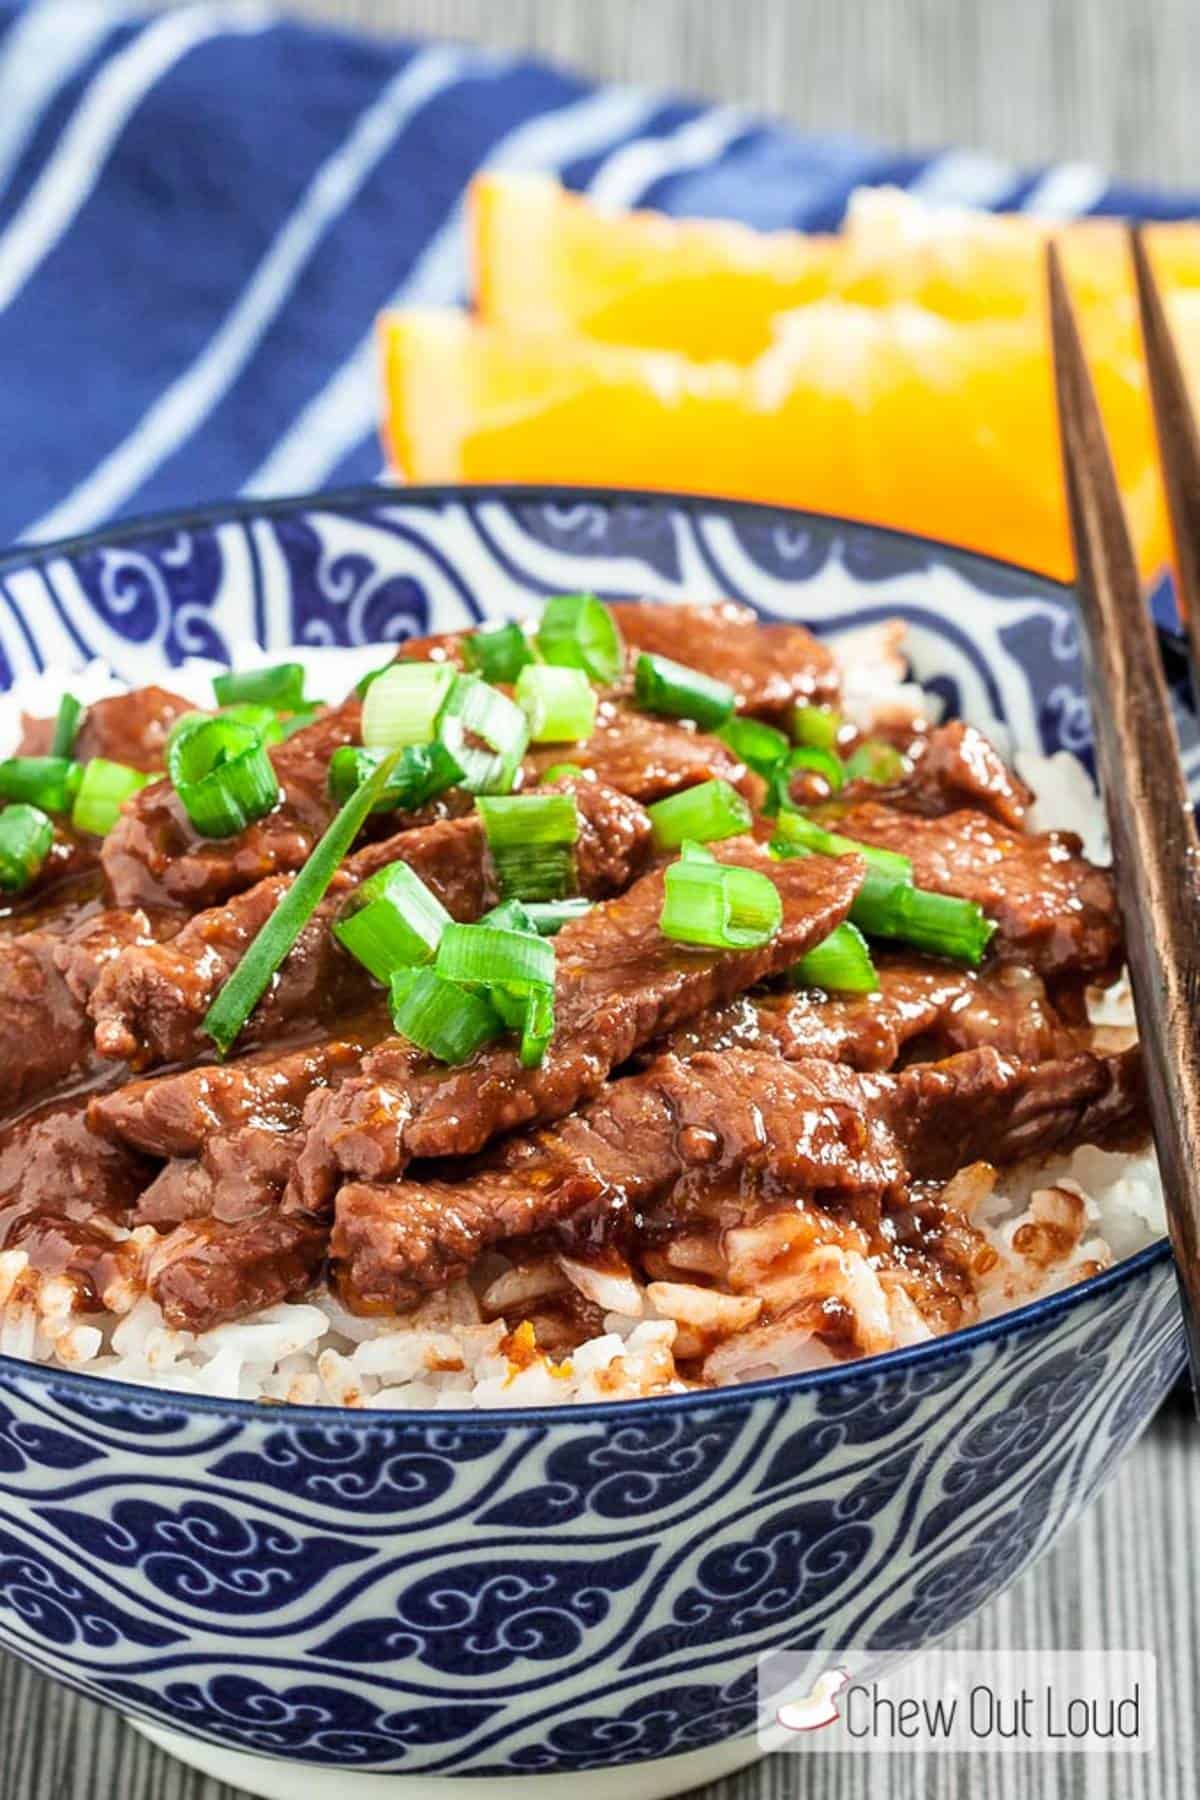 Orange beef and rice in a bowl with chopsticks.